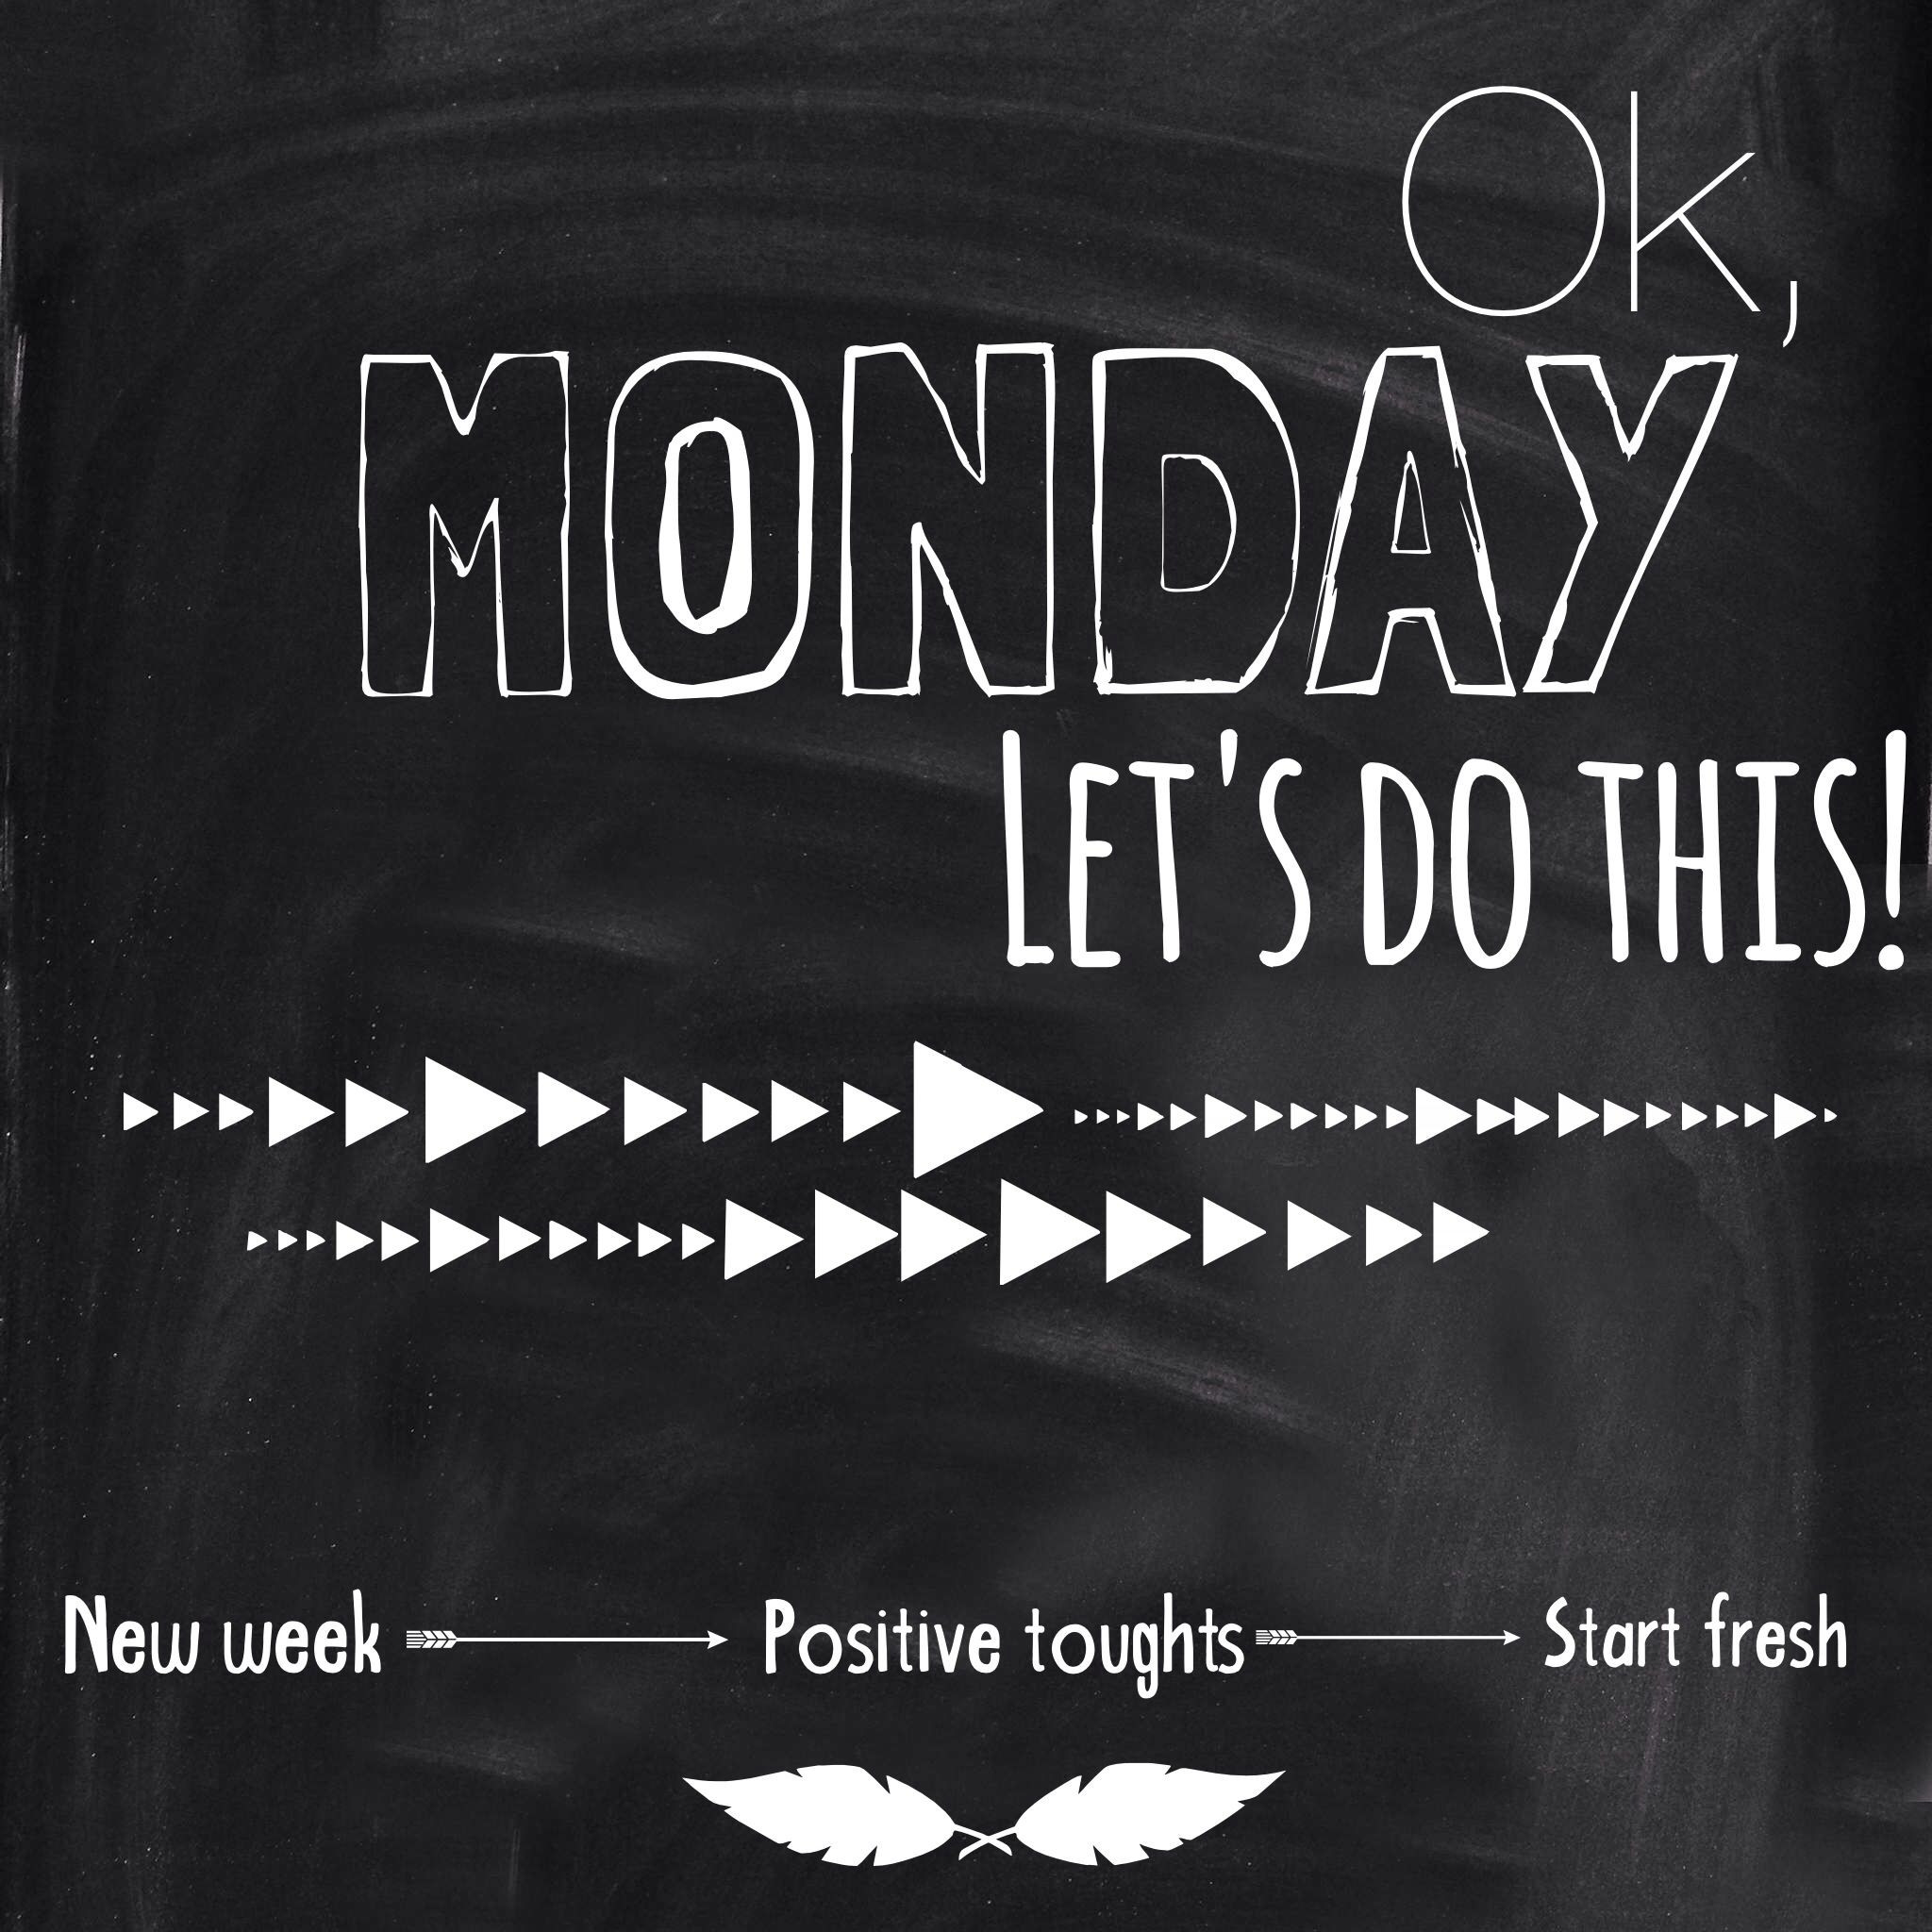 Inspirational Quotes To Start The Week
 Quote Ok monday let s do this New week positive